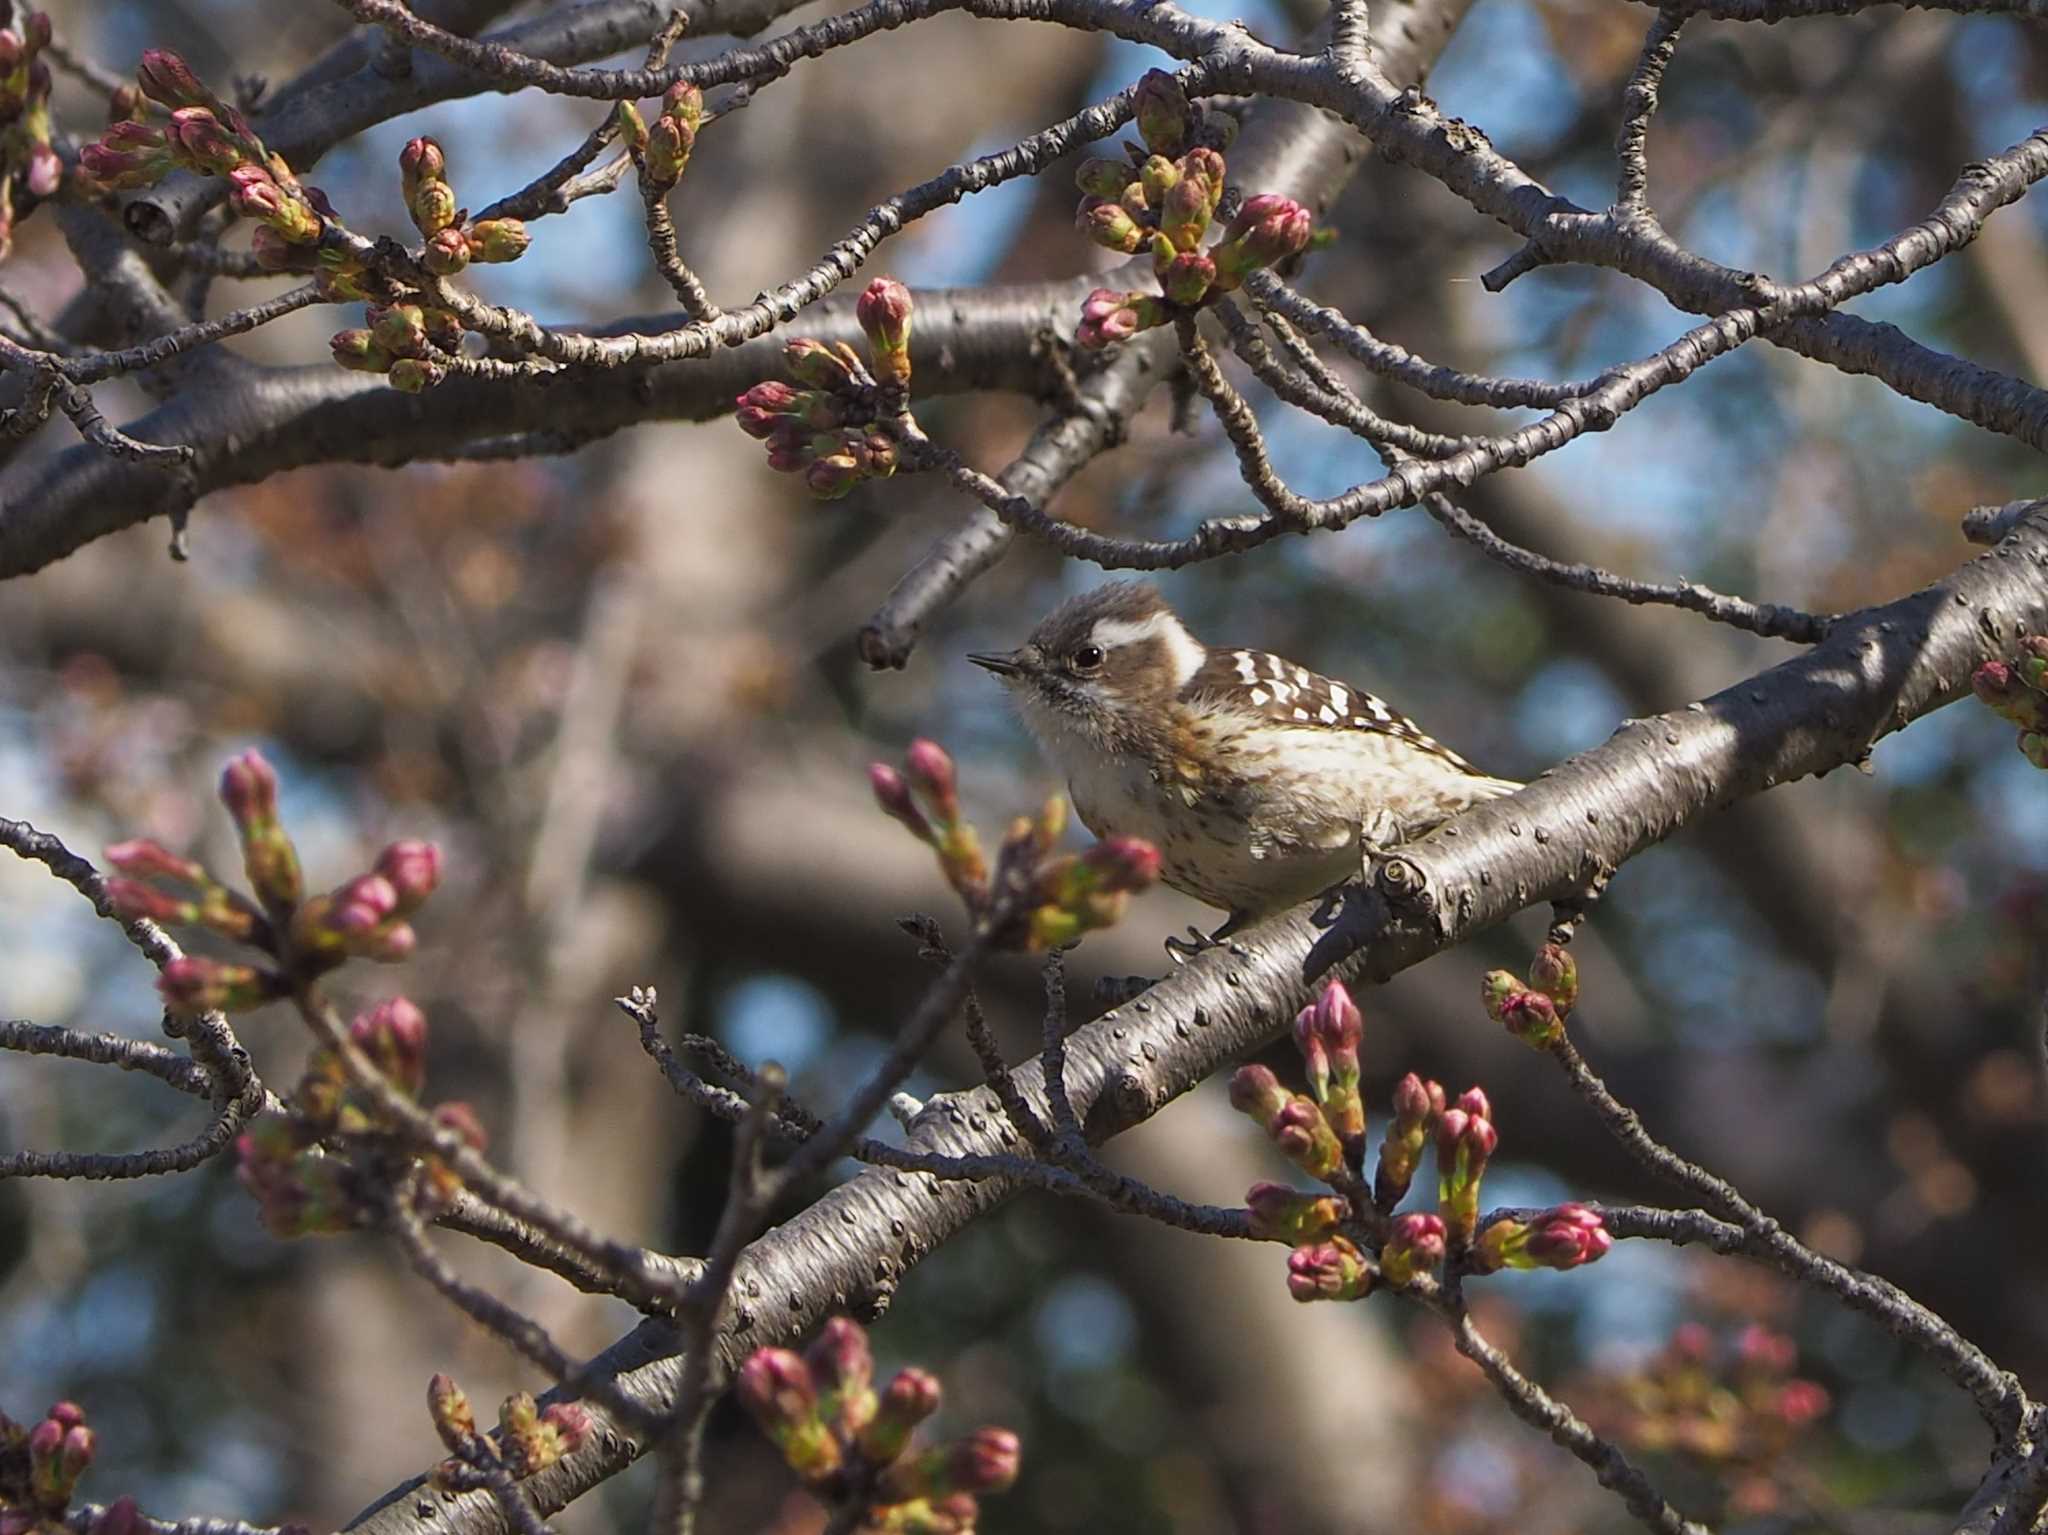 Photo of Japanese Pygmy Woodpecker at 大庭城址公園 by Tosh@Bird